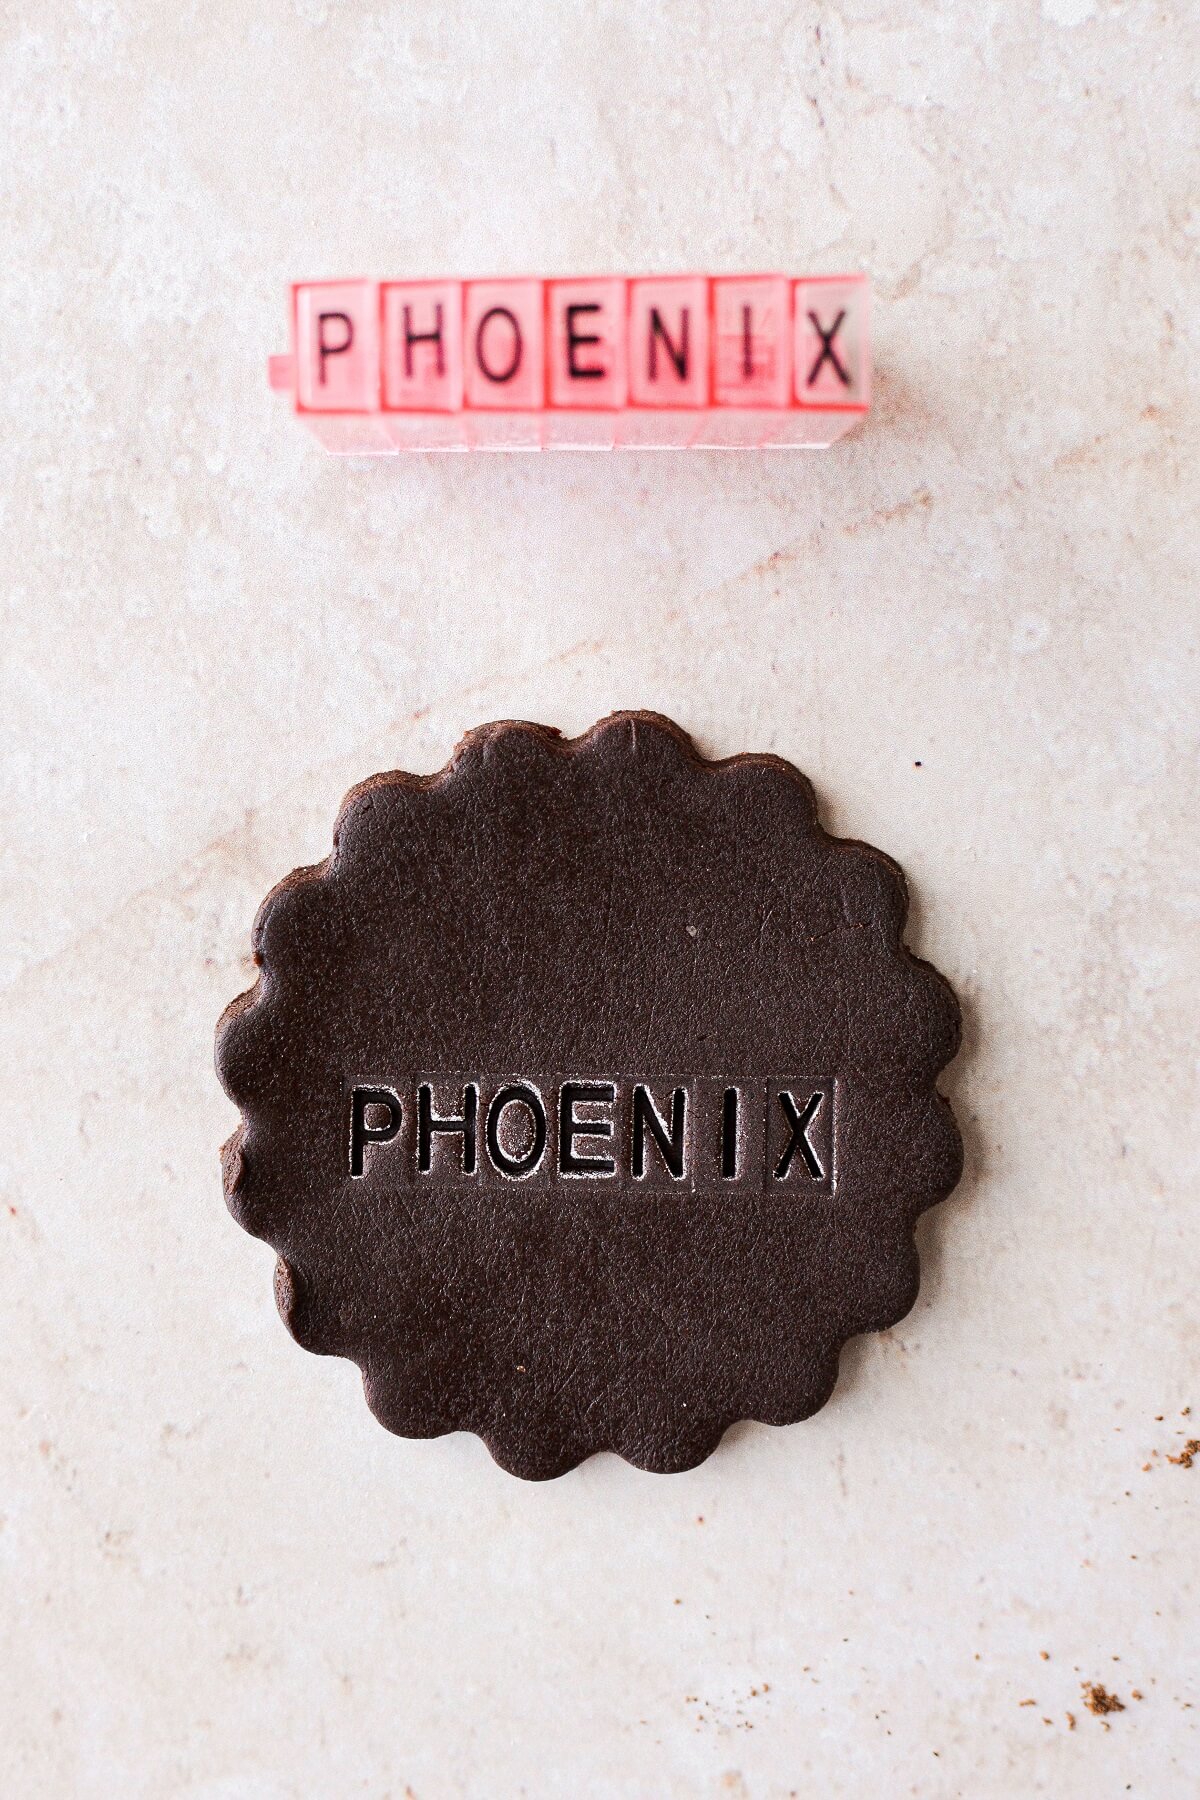 A chocolate place card cookie stamped with the name "Phoenix".